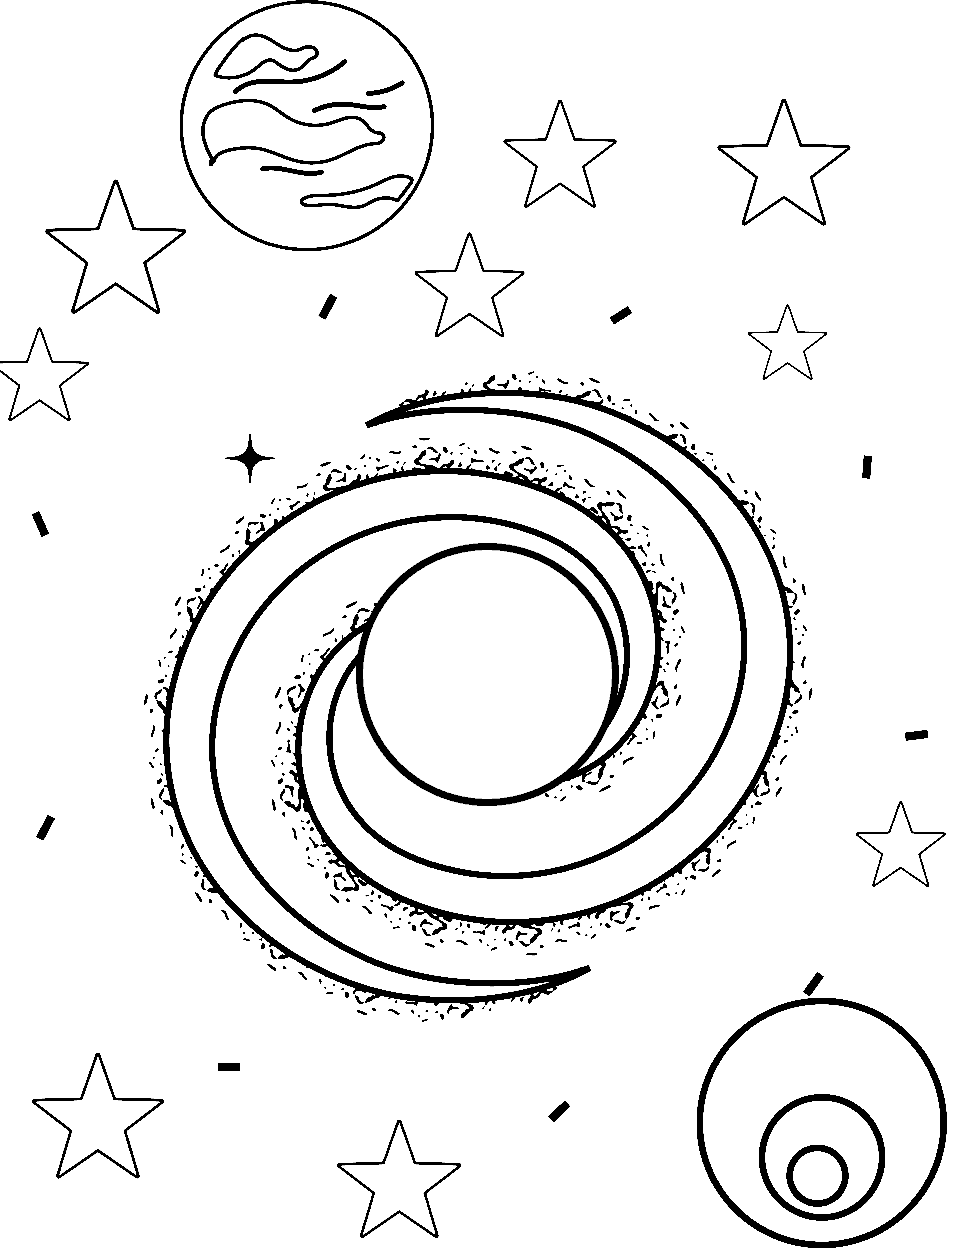 Night Sky Wonders Coloring Page - Stars, planets, and the Milky Way beautifully displayed in a coloring sheet.